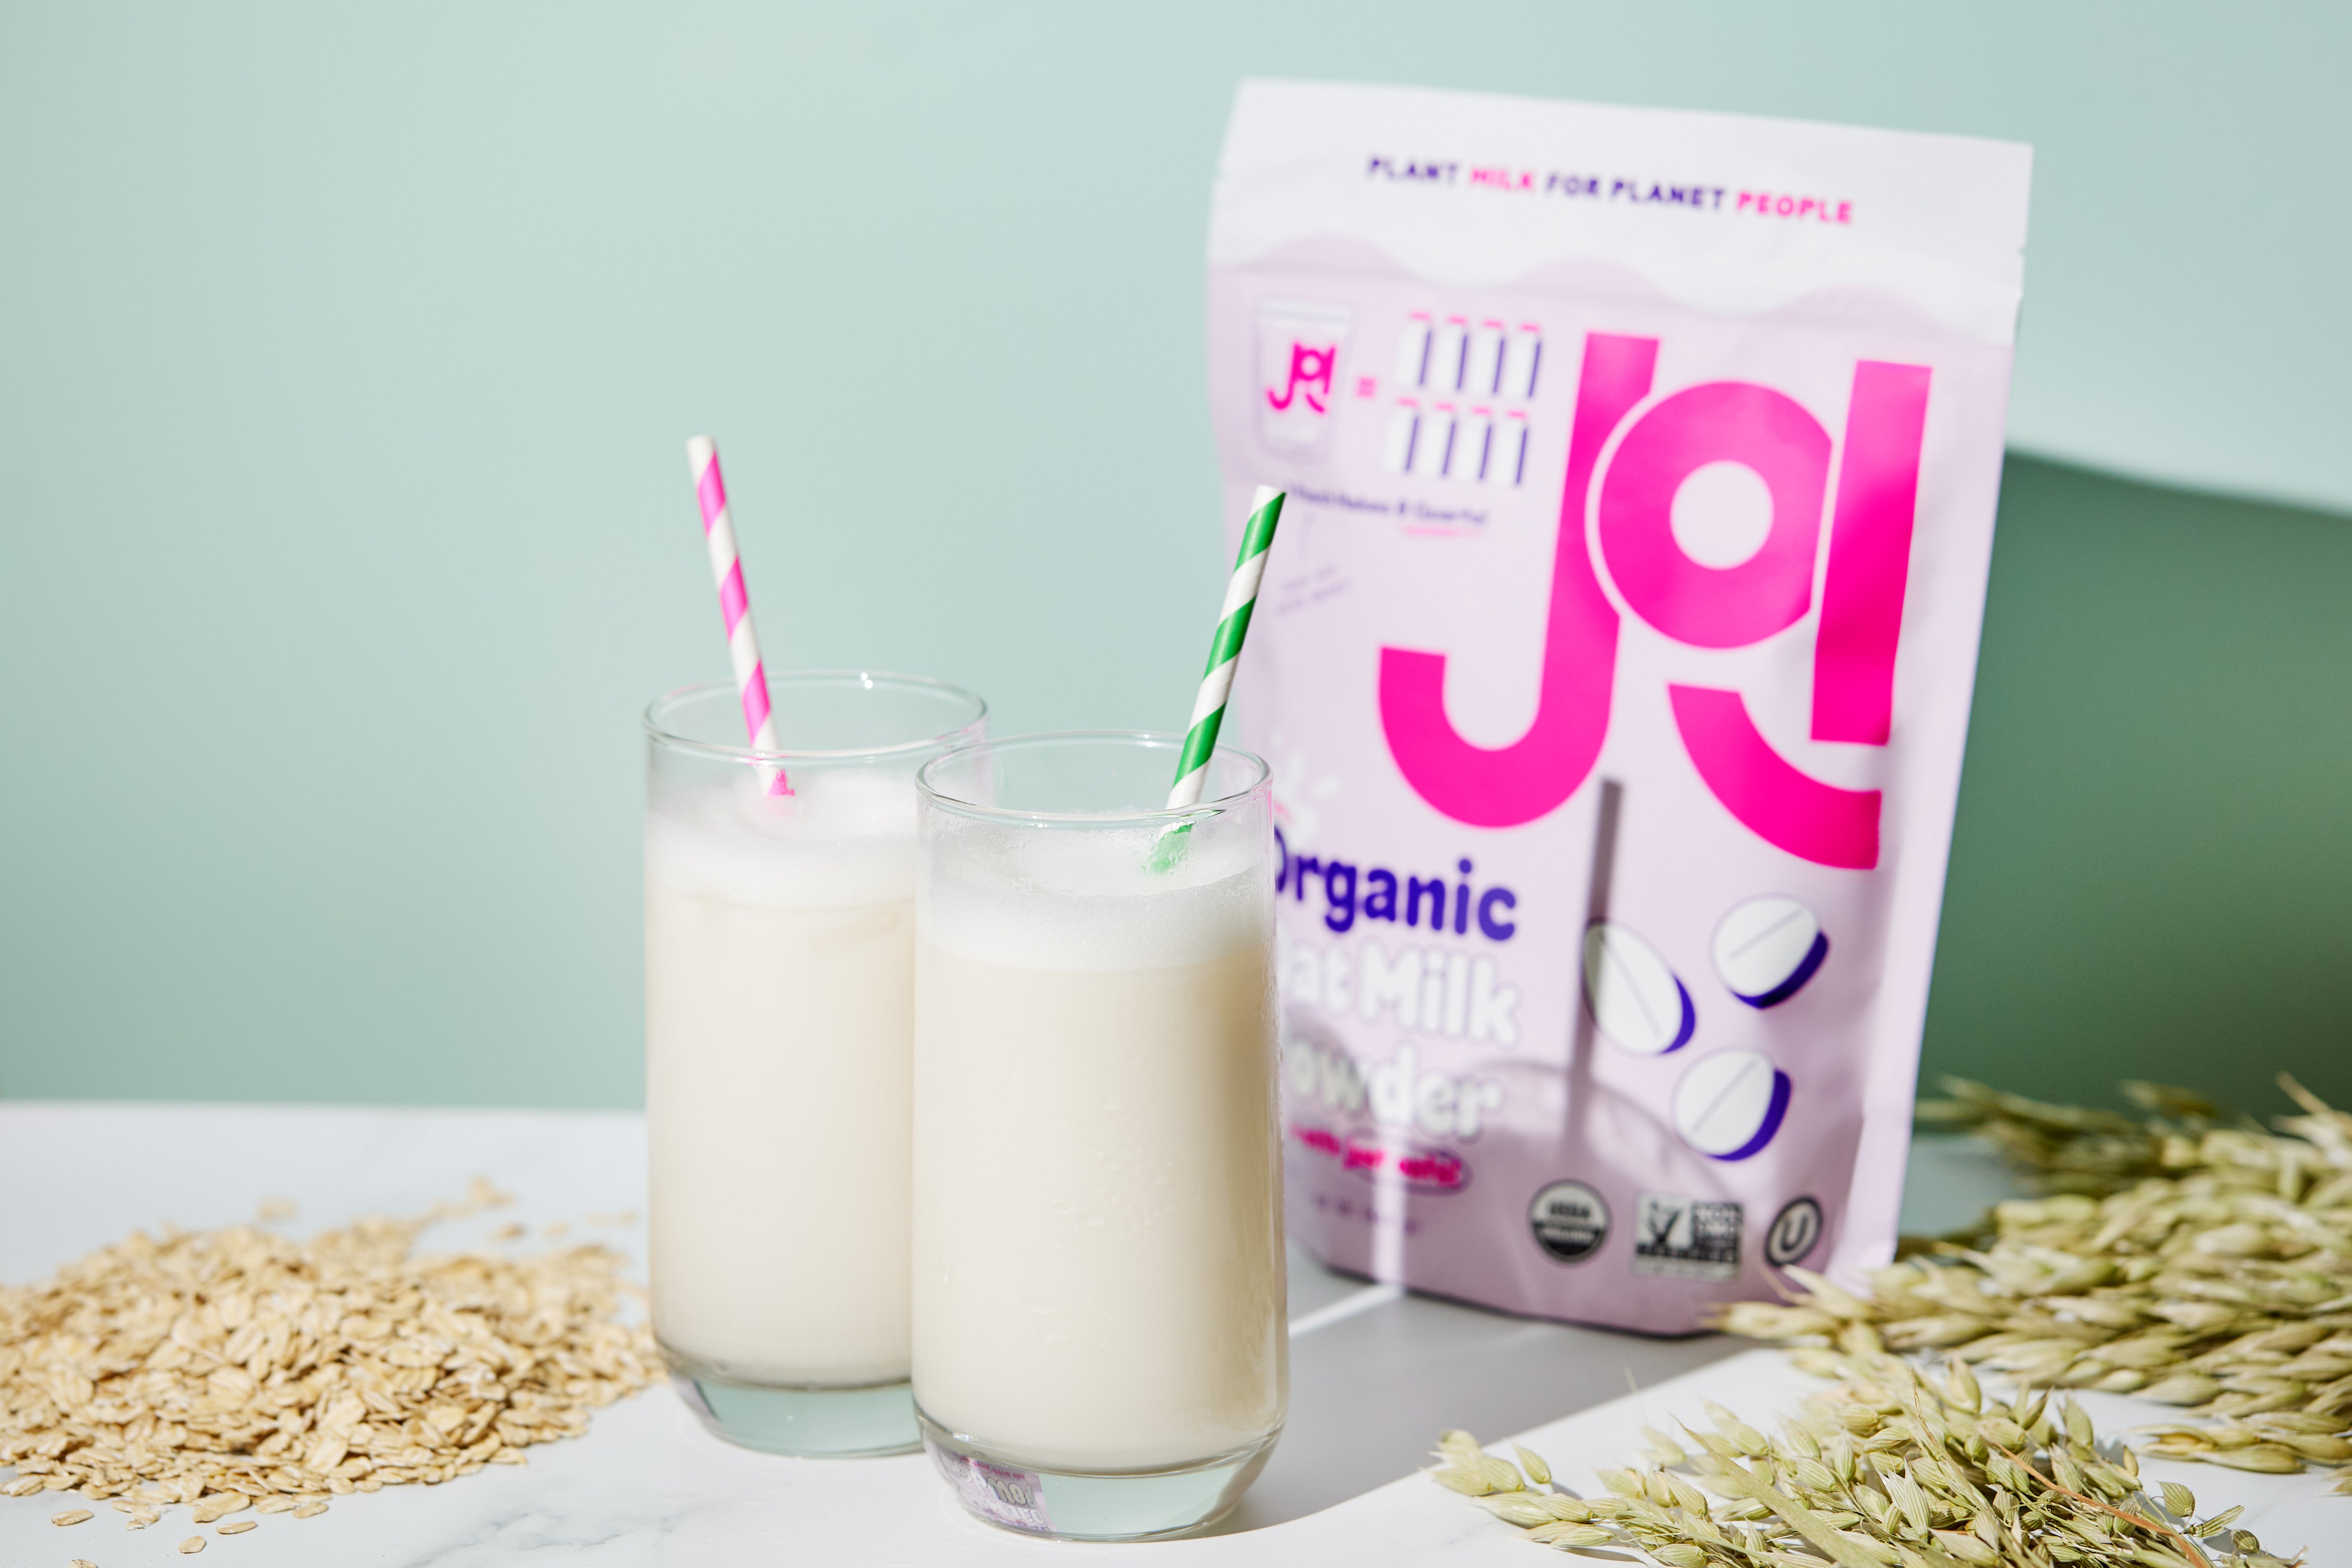 JOI Oat Milk vs. Oatly: Nutrition and More